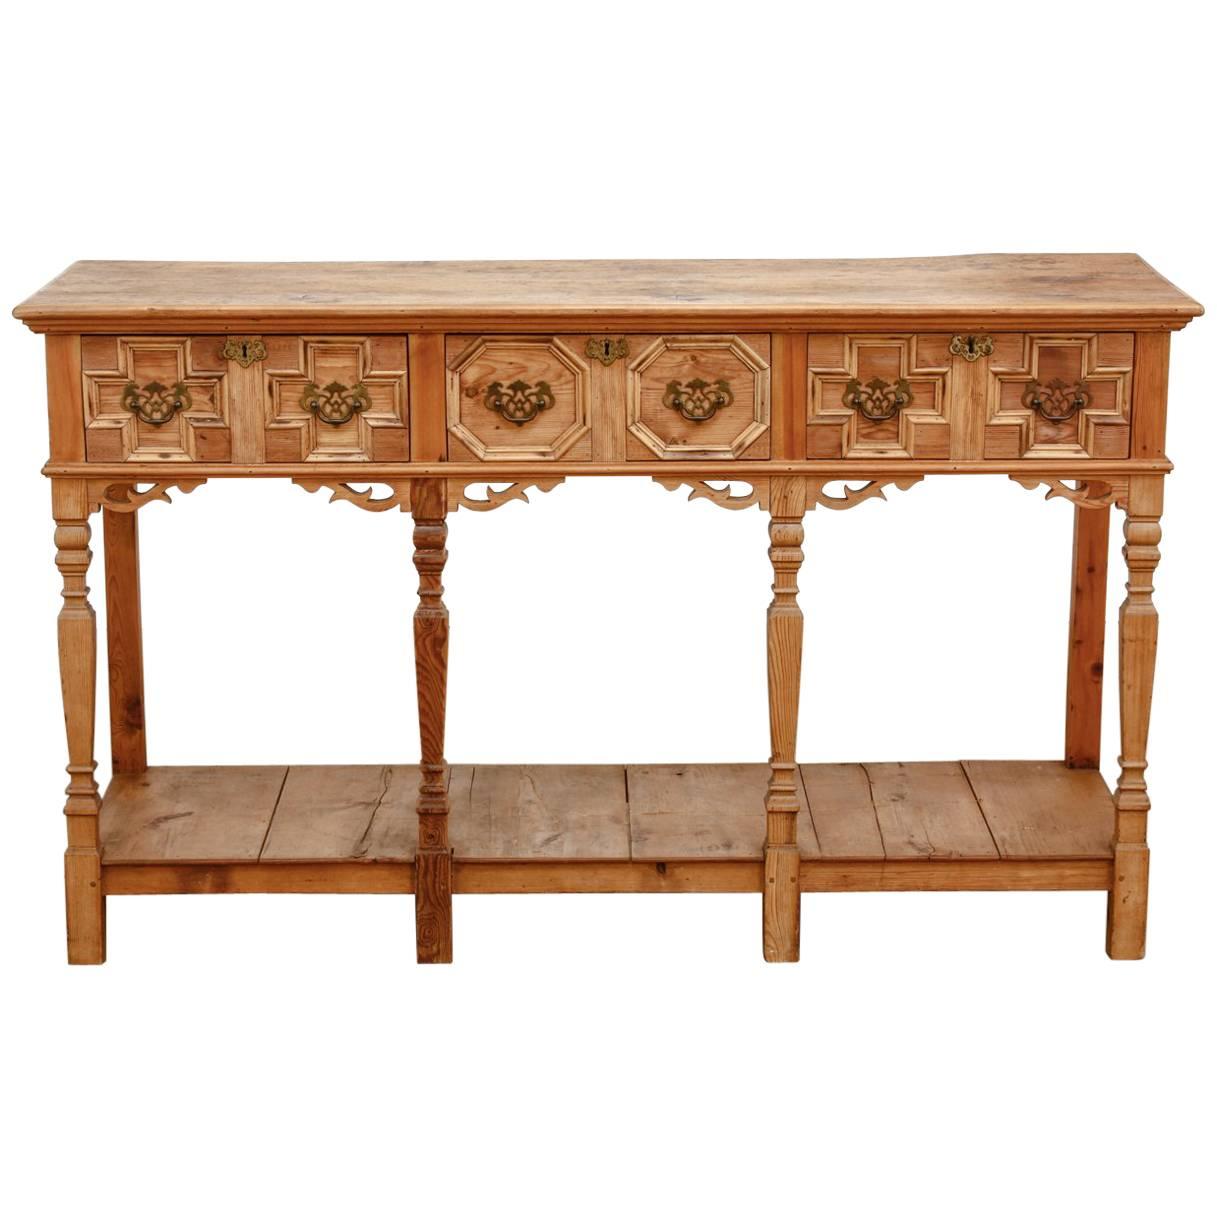 Spanish Baroque Style Pine Console Table or Server